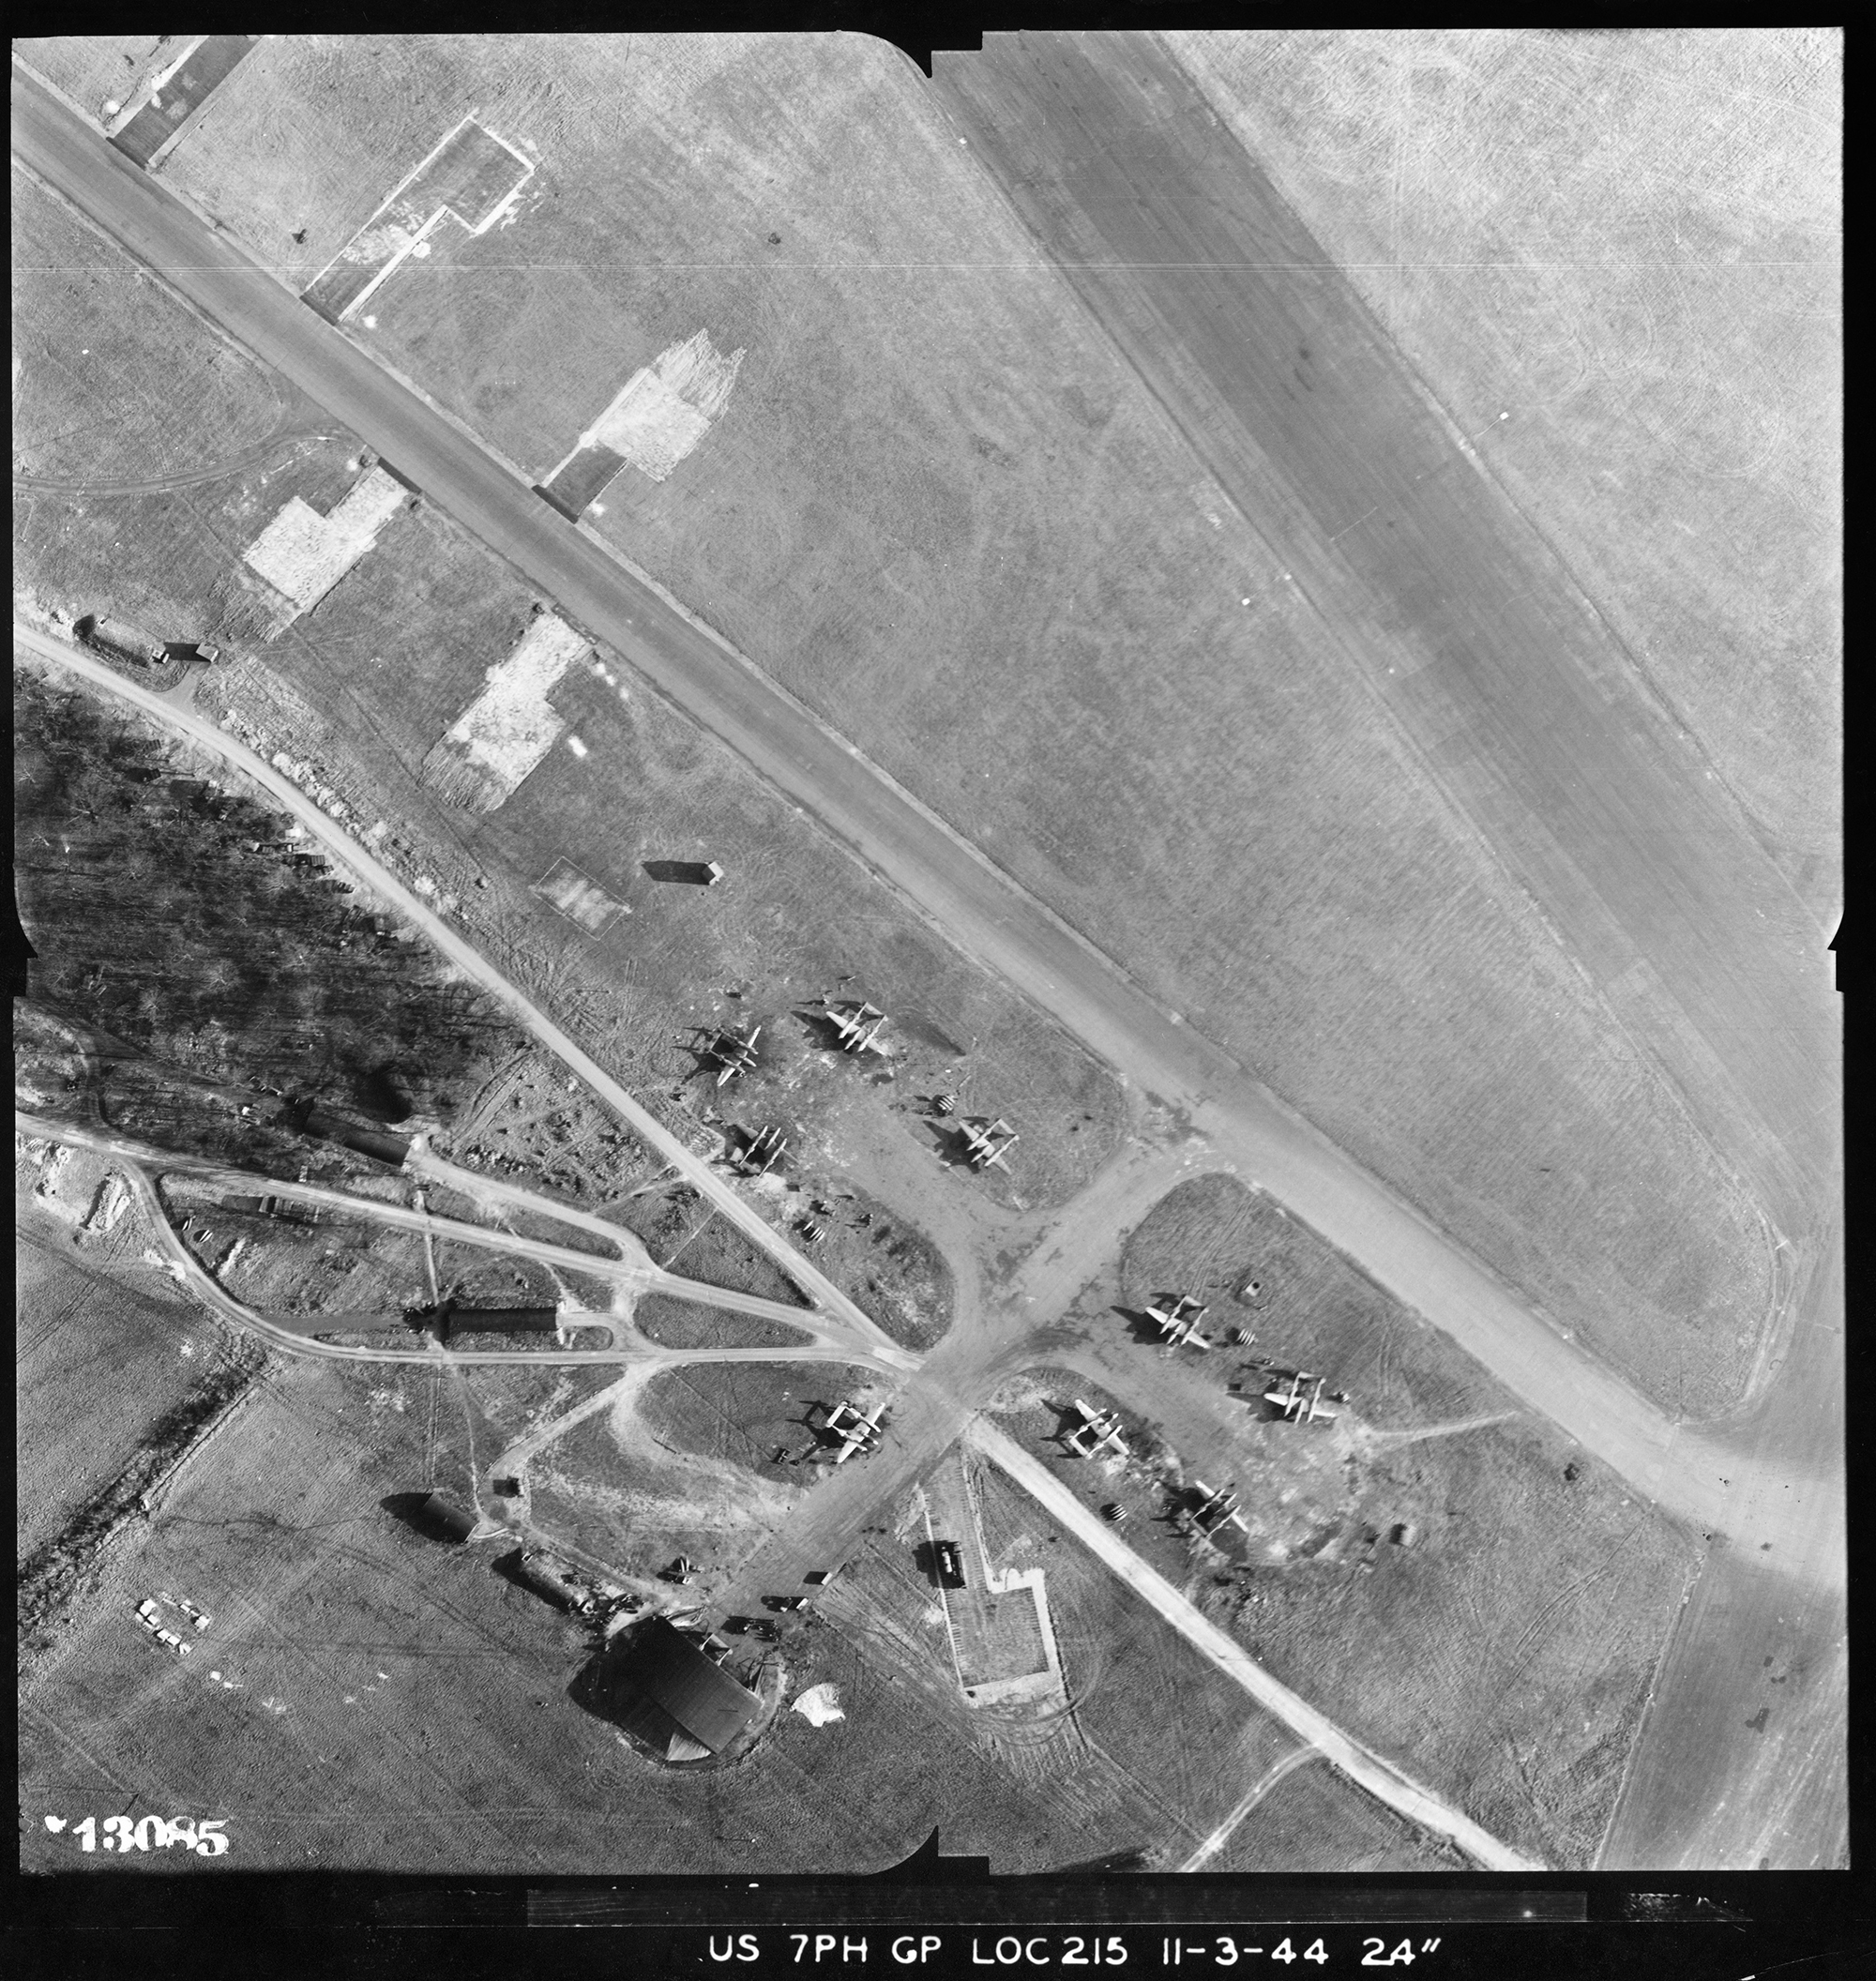 A black and white vertical aerial photograph showing part of an airfield. Running diagonally from top-left to bottom-right is a section of perimeter road. To the right of this is a section of runway. To the left is another road and a dispersal area with several parked aircraft and a small hangar. 